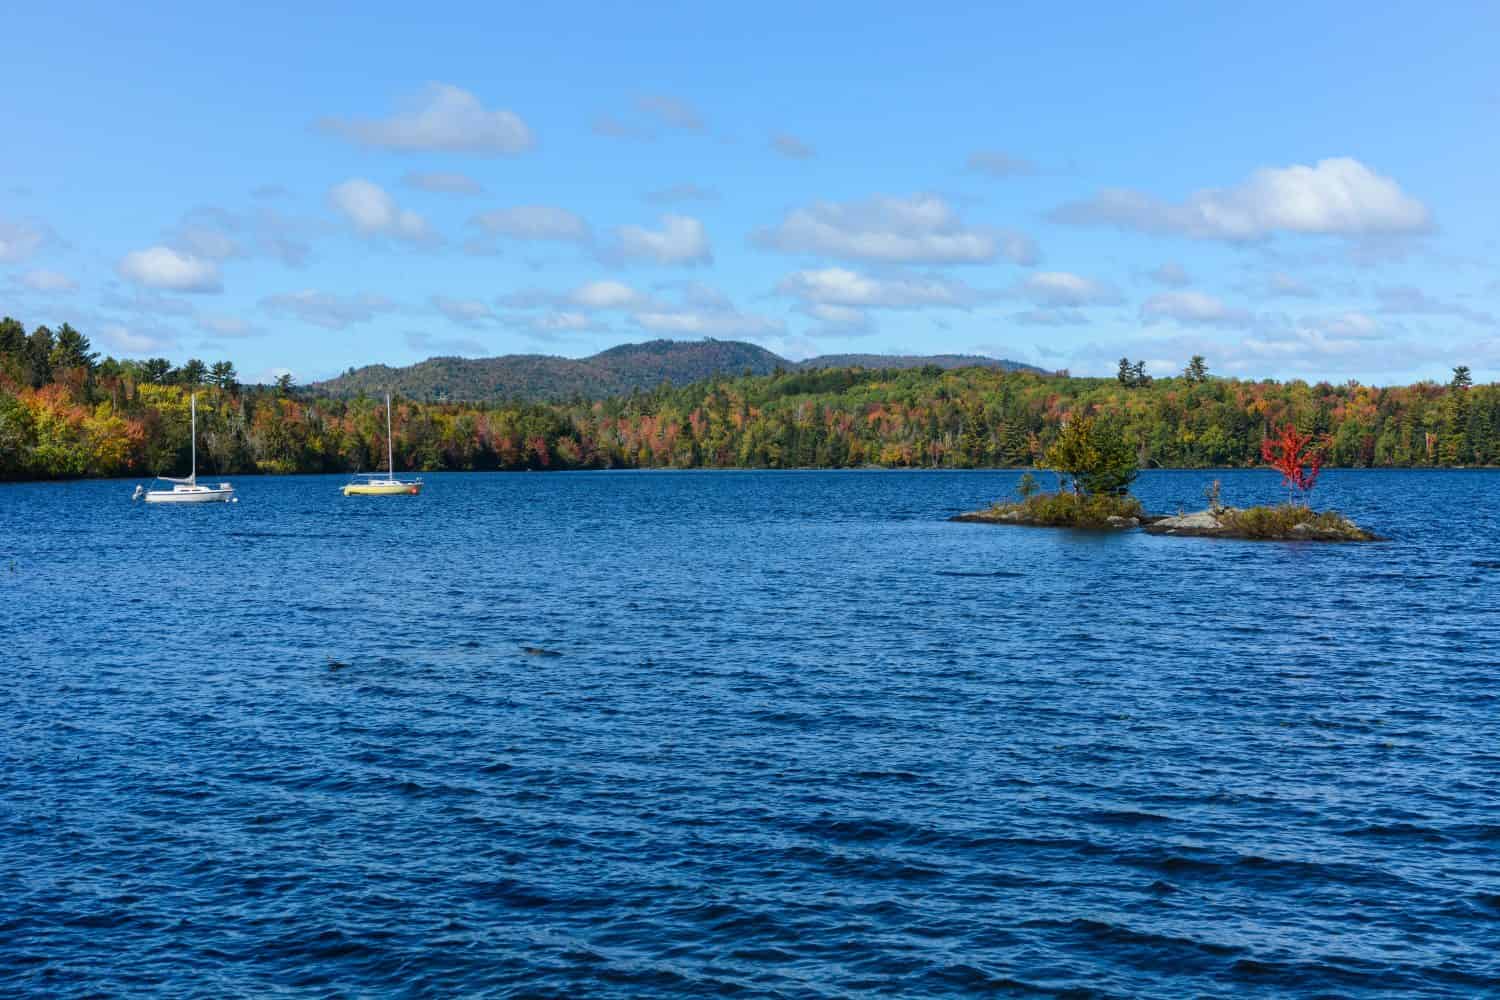 Boats on Umbagog Lake in New Hampshire with blue sky